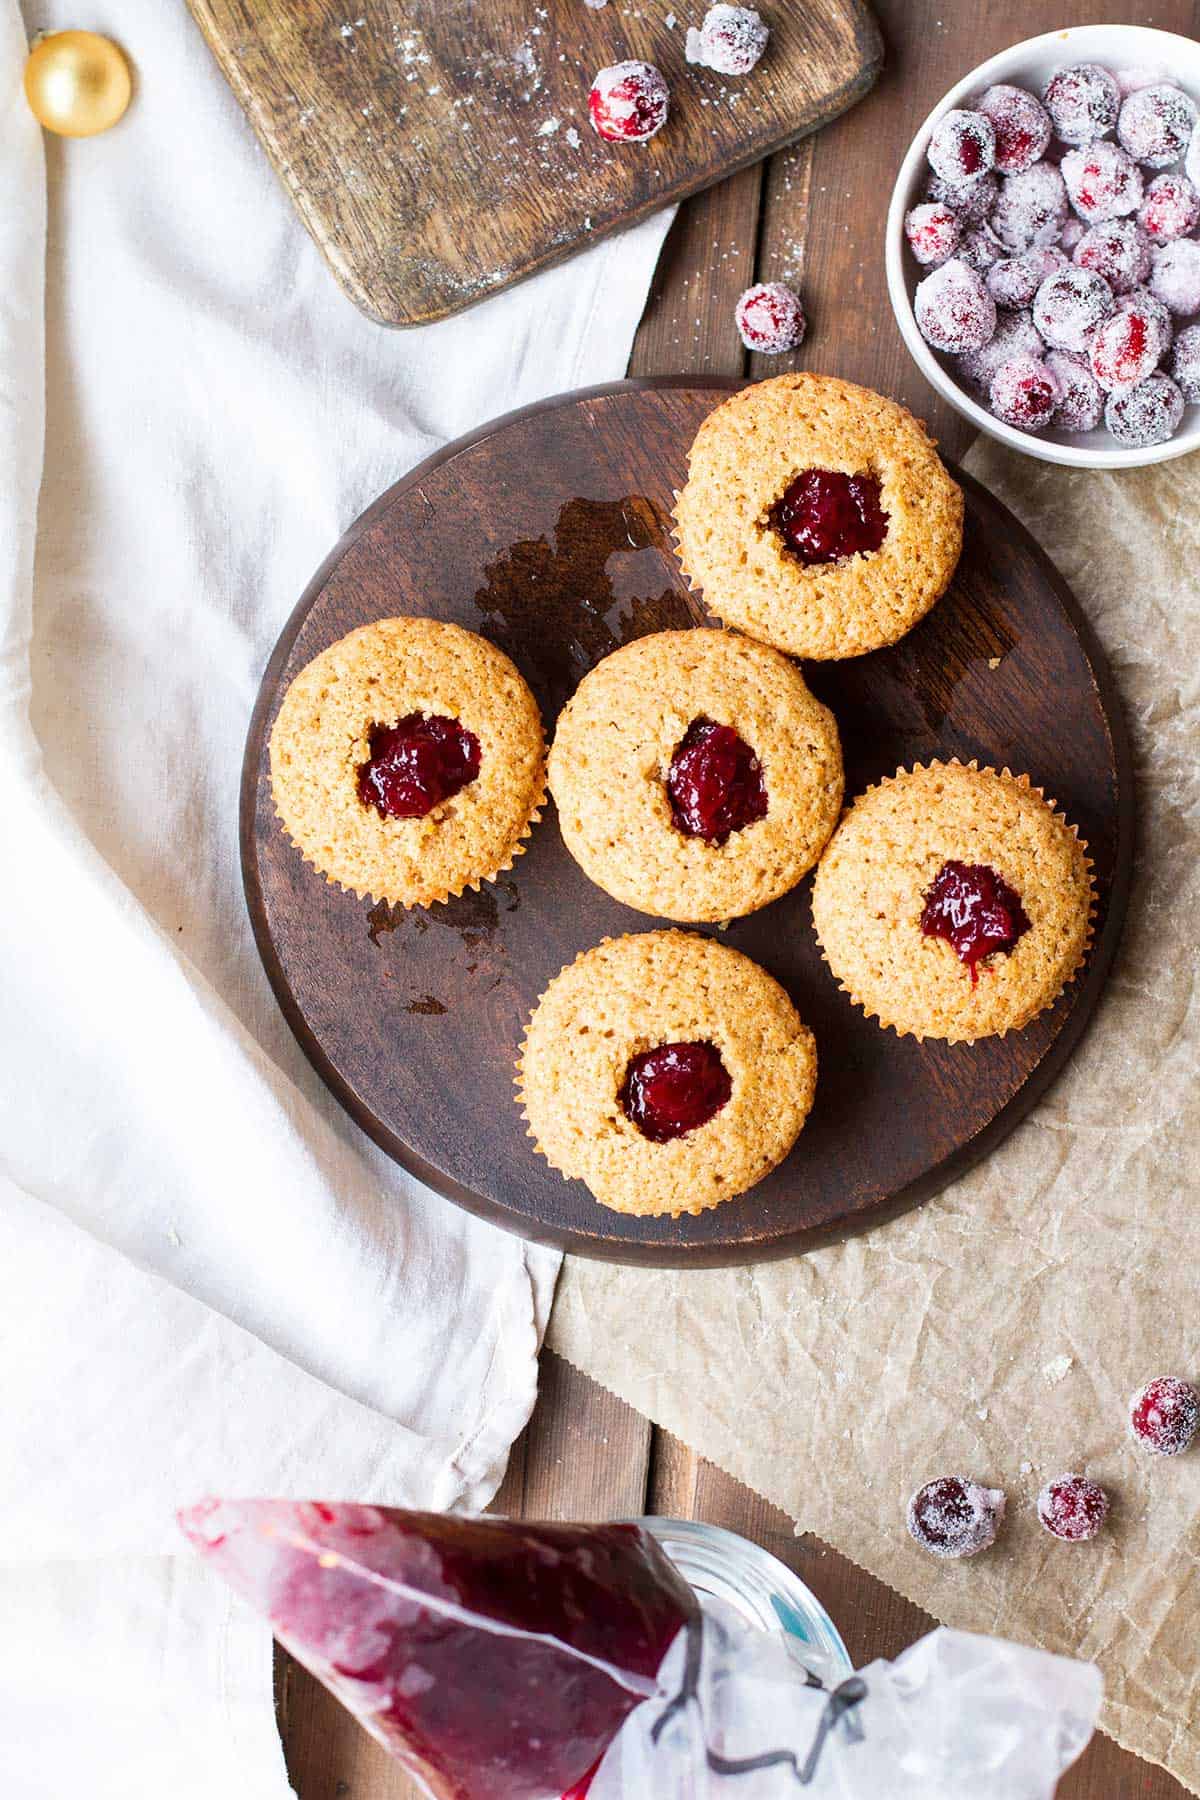 Muffins seen from above, cut hollows filled with cranberry sauce.